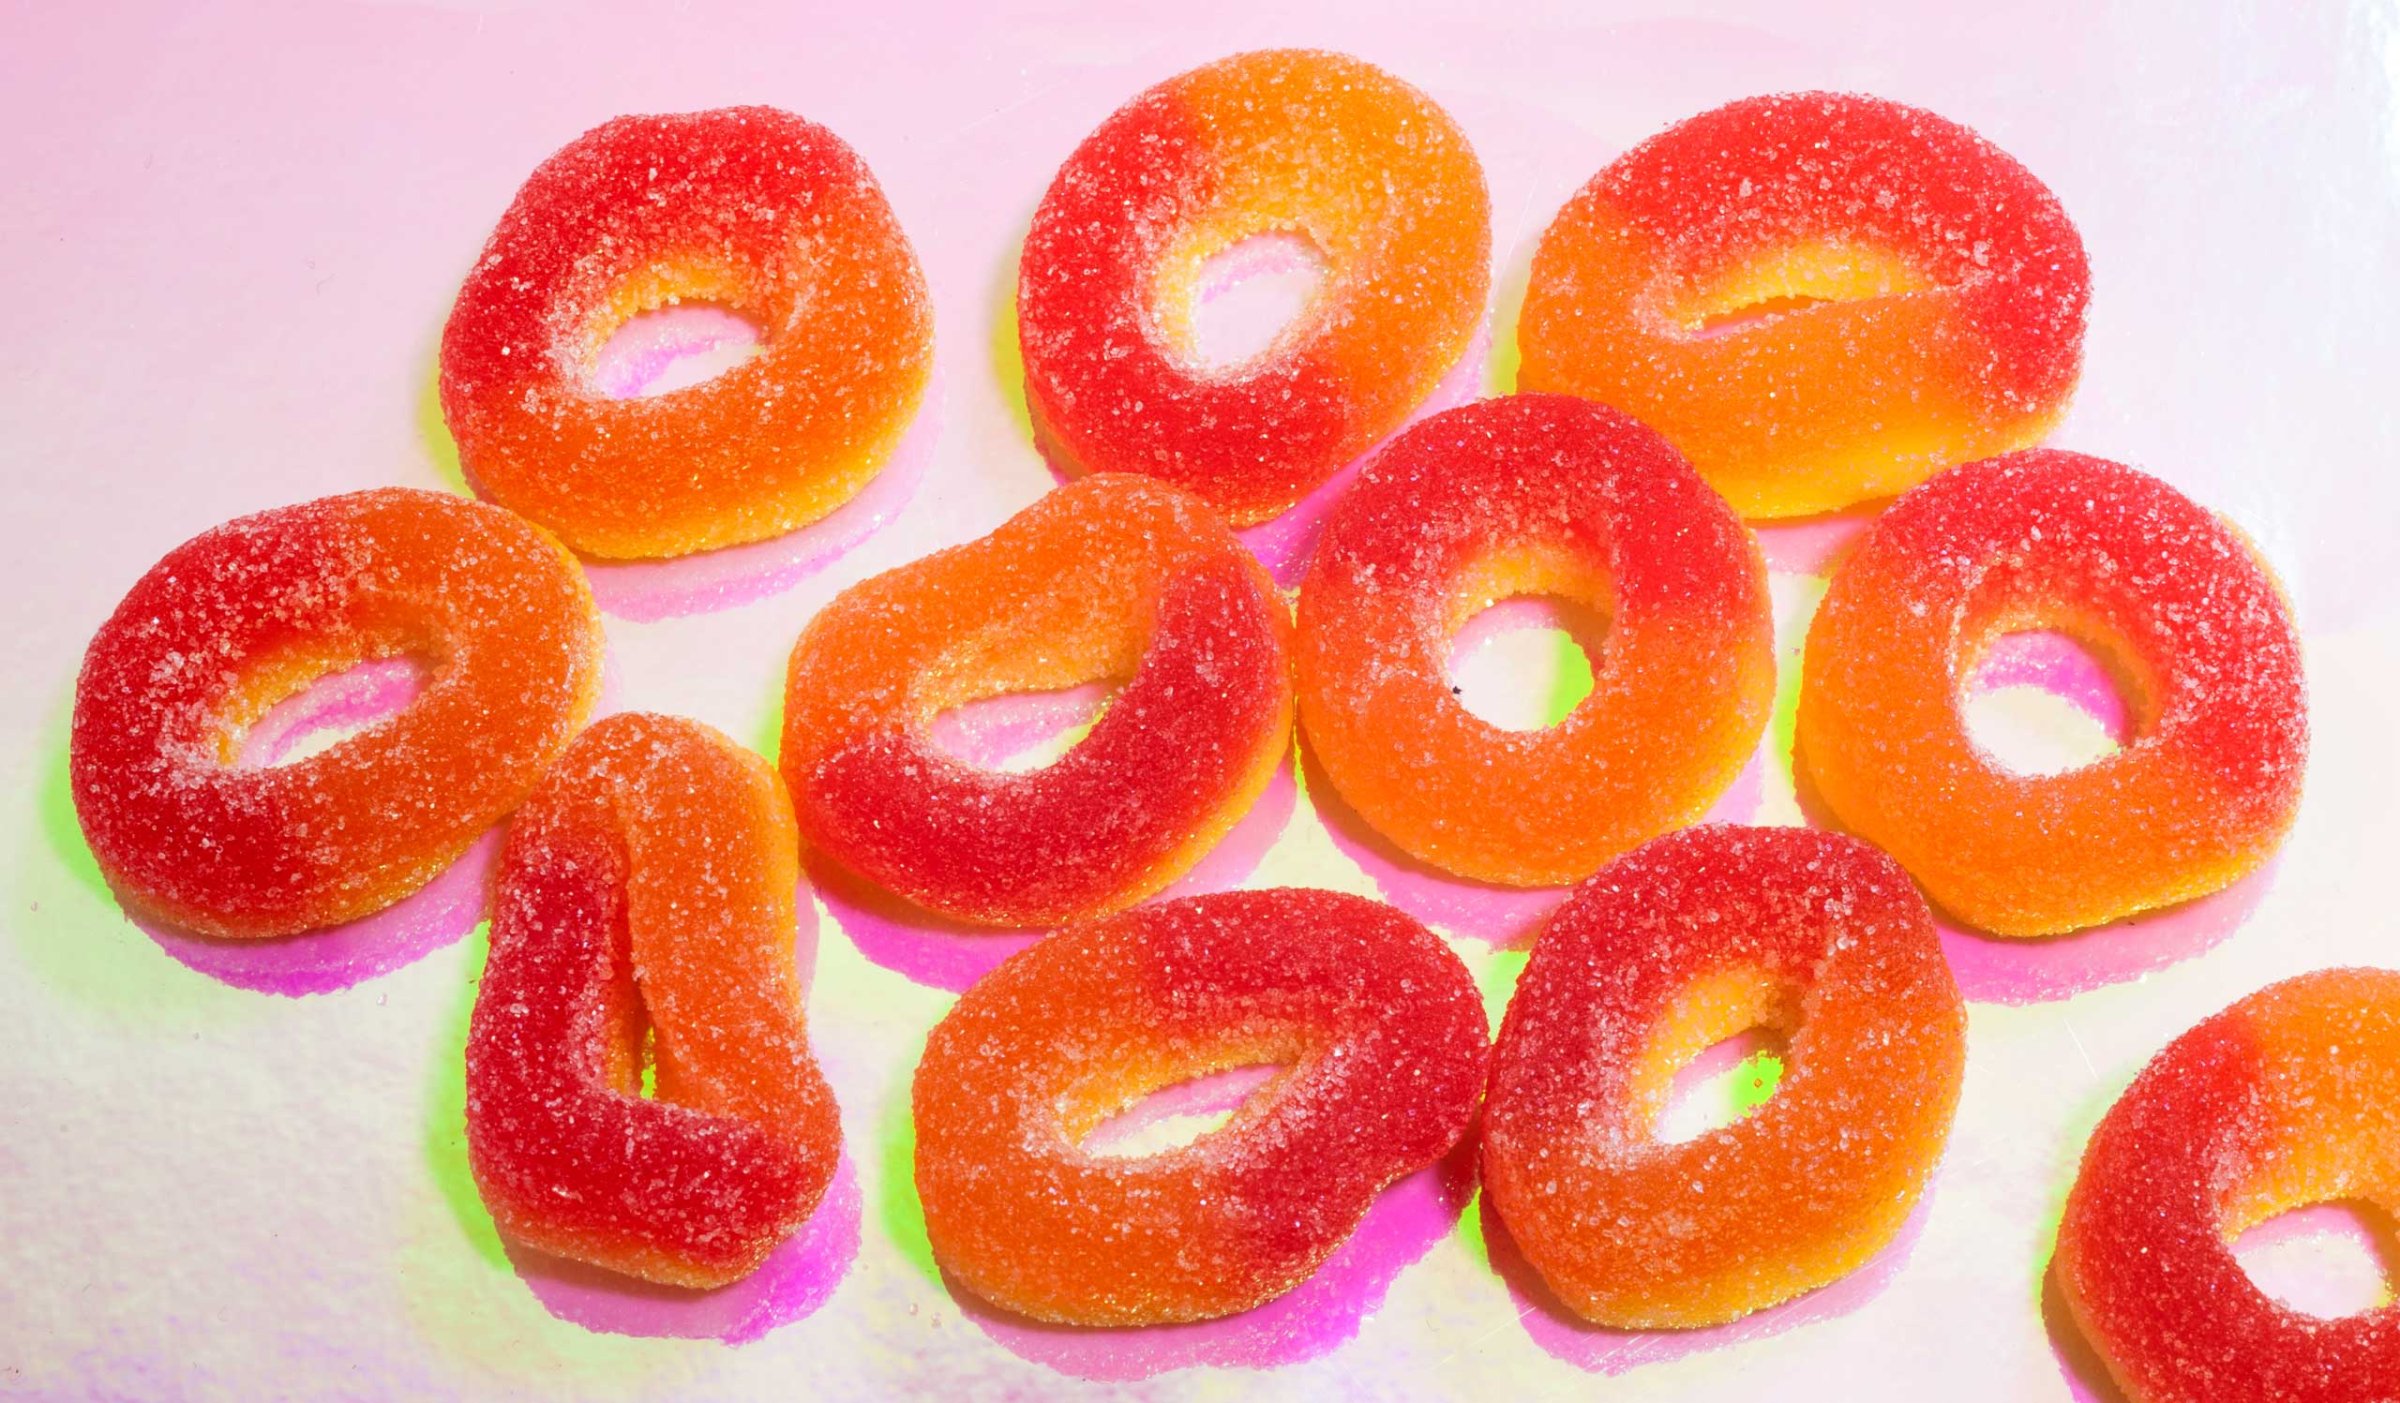 TIME.com stock photos Food Snacks Candy Peach Rings